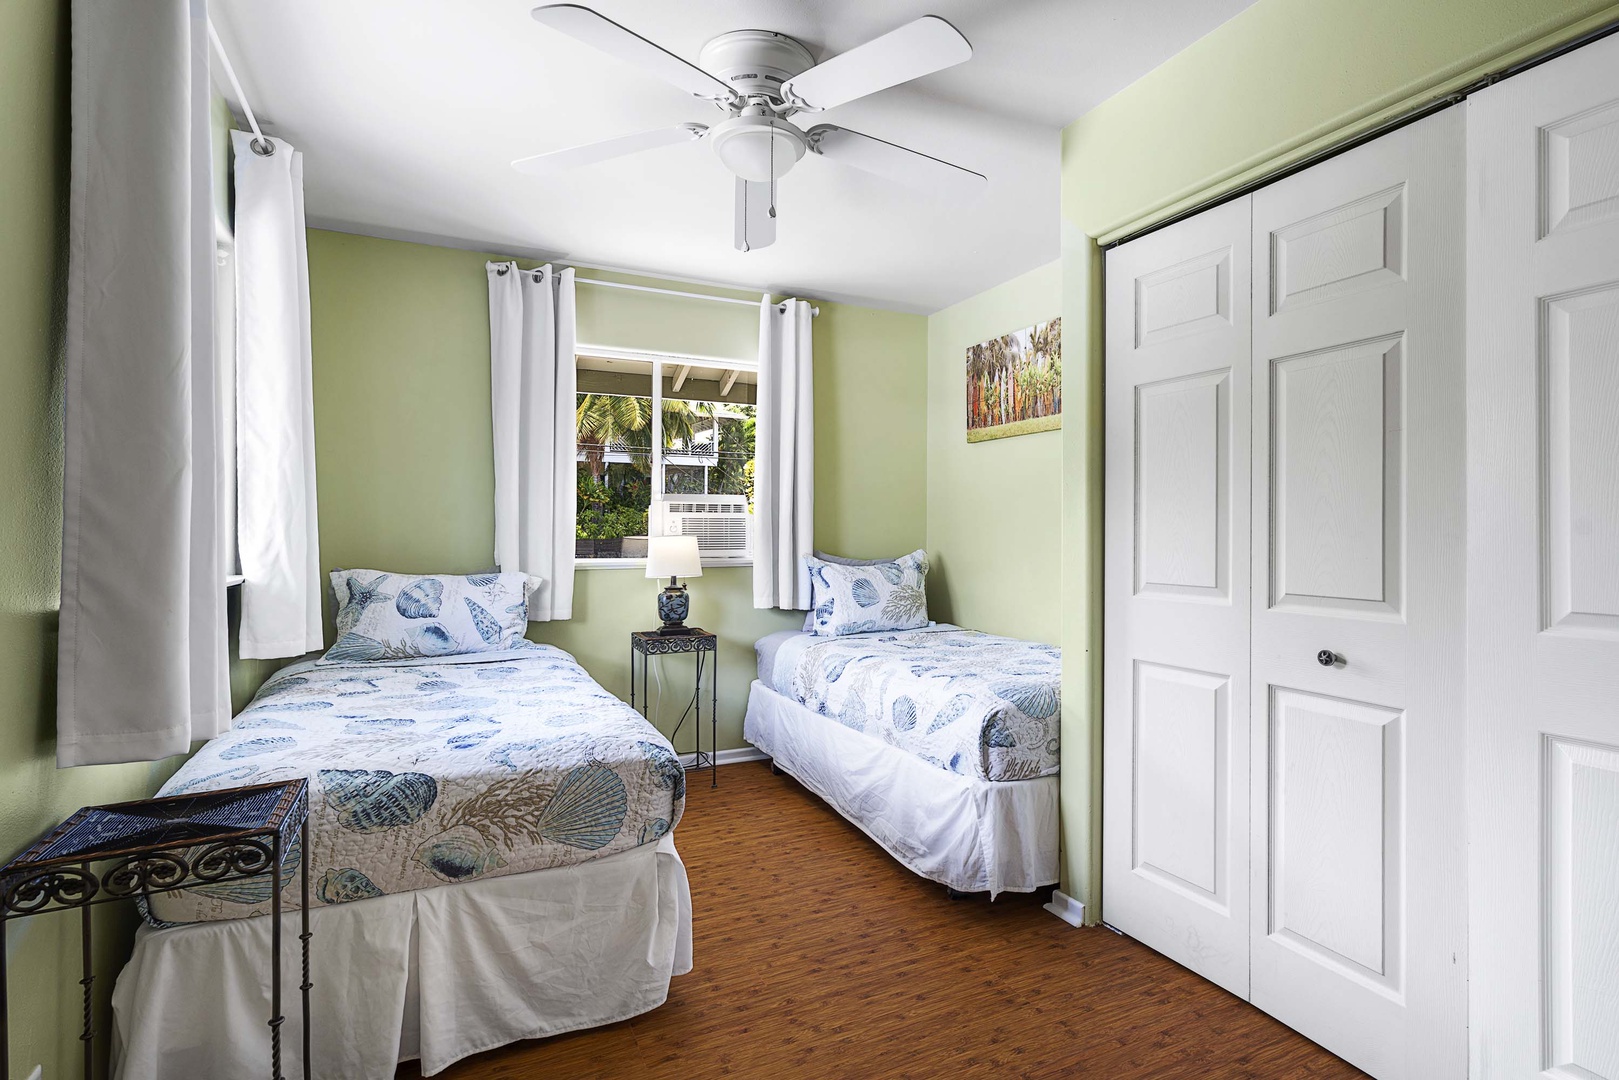 Kailua Kona Vacation Rentals, Hale A Kai - 2nd floor guest room equipped with 2 Twins and A/C